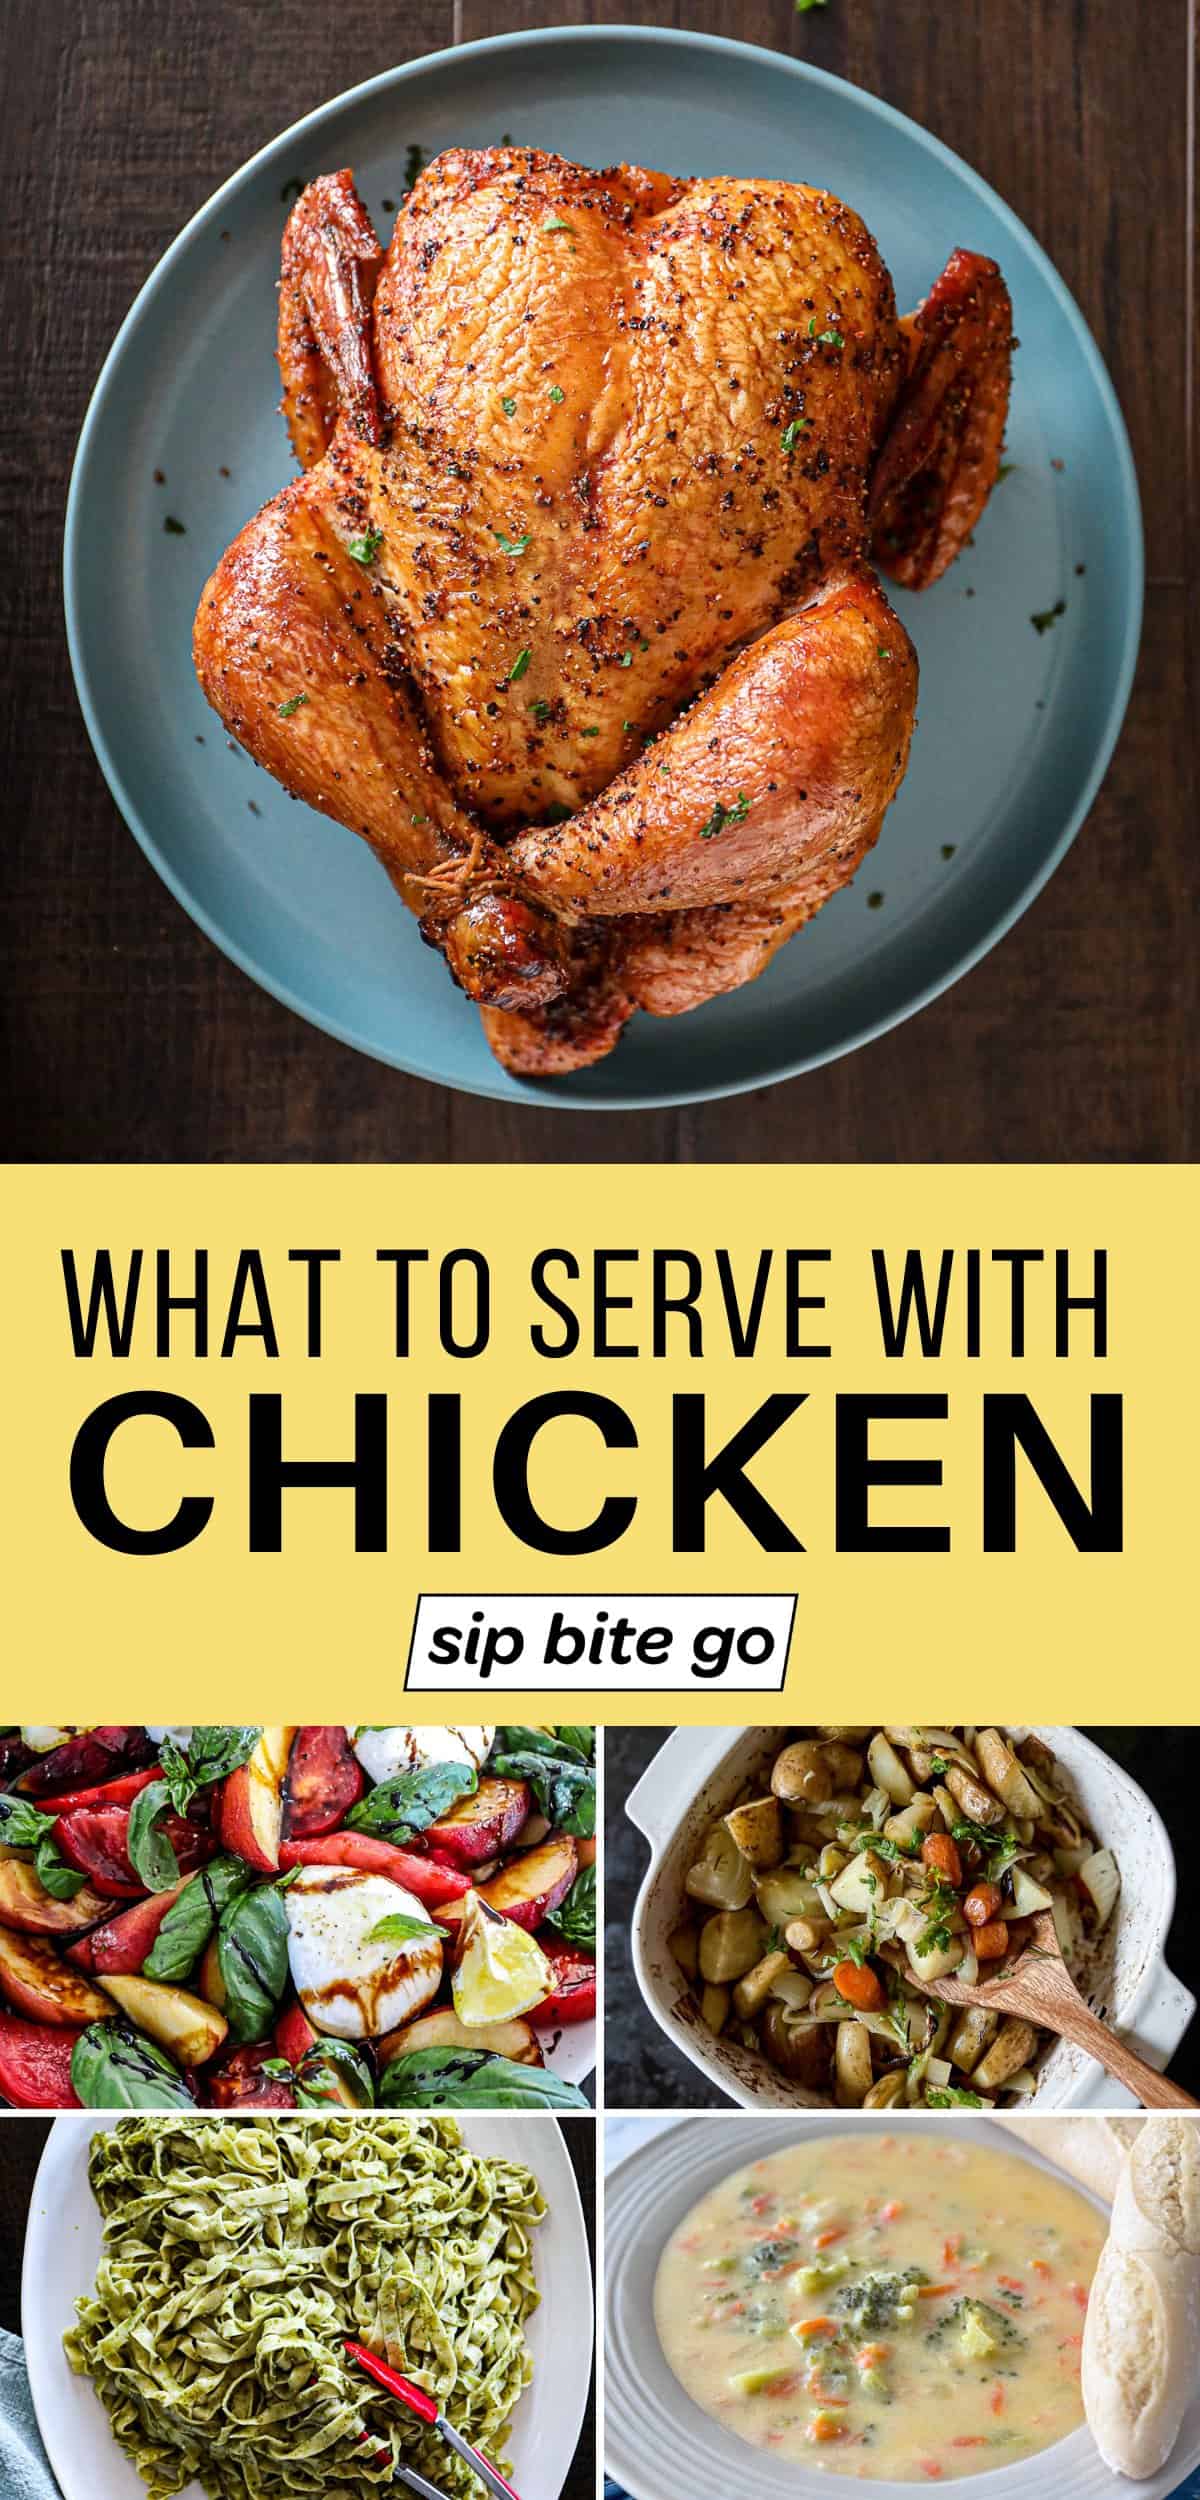 What to serve with chicken recipe collage with text overlay